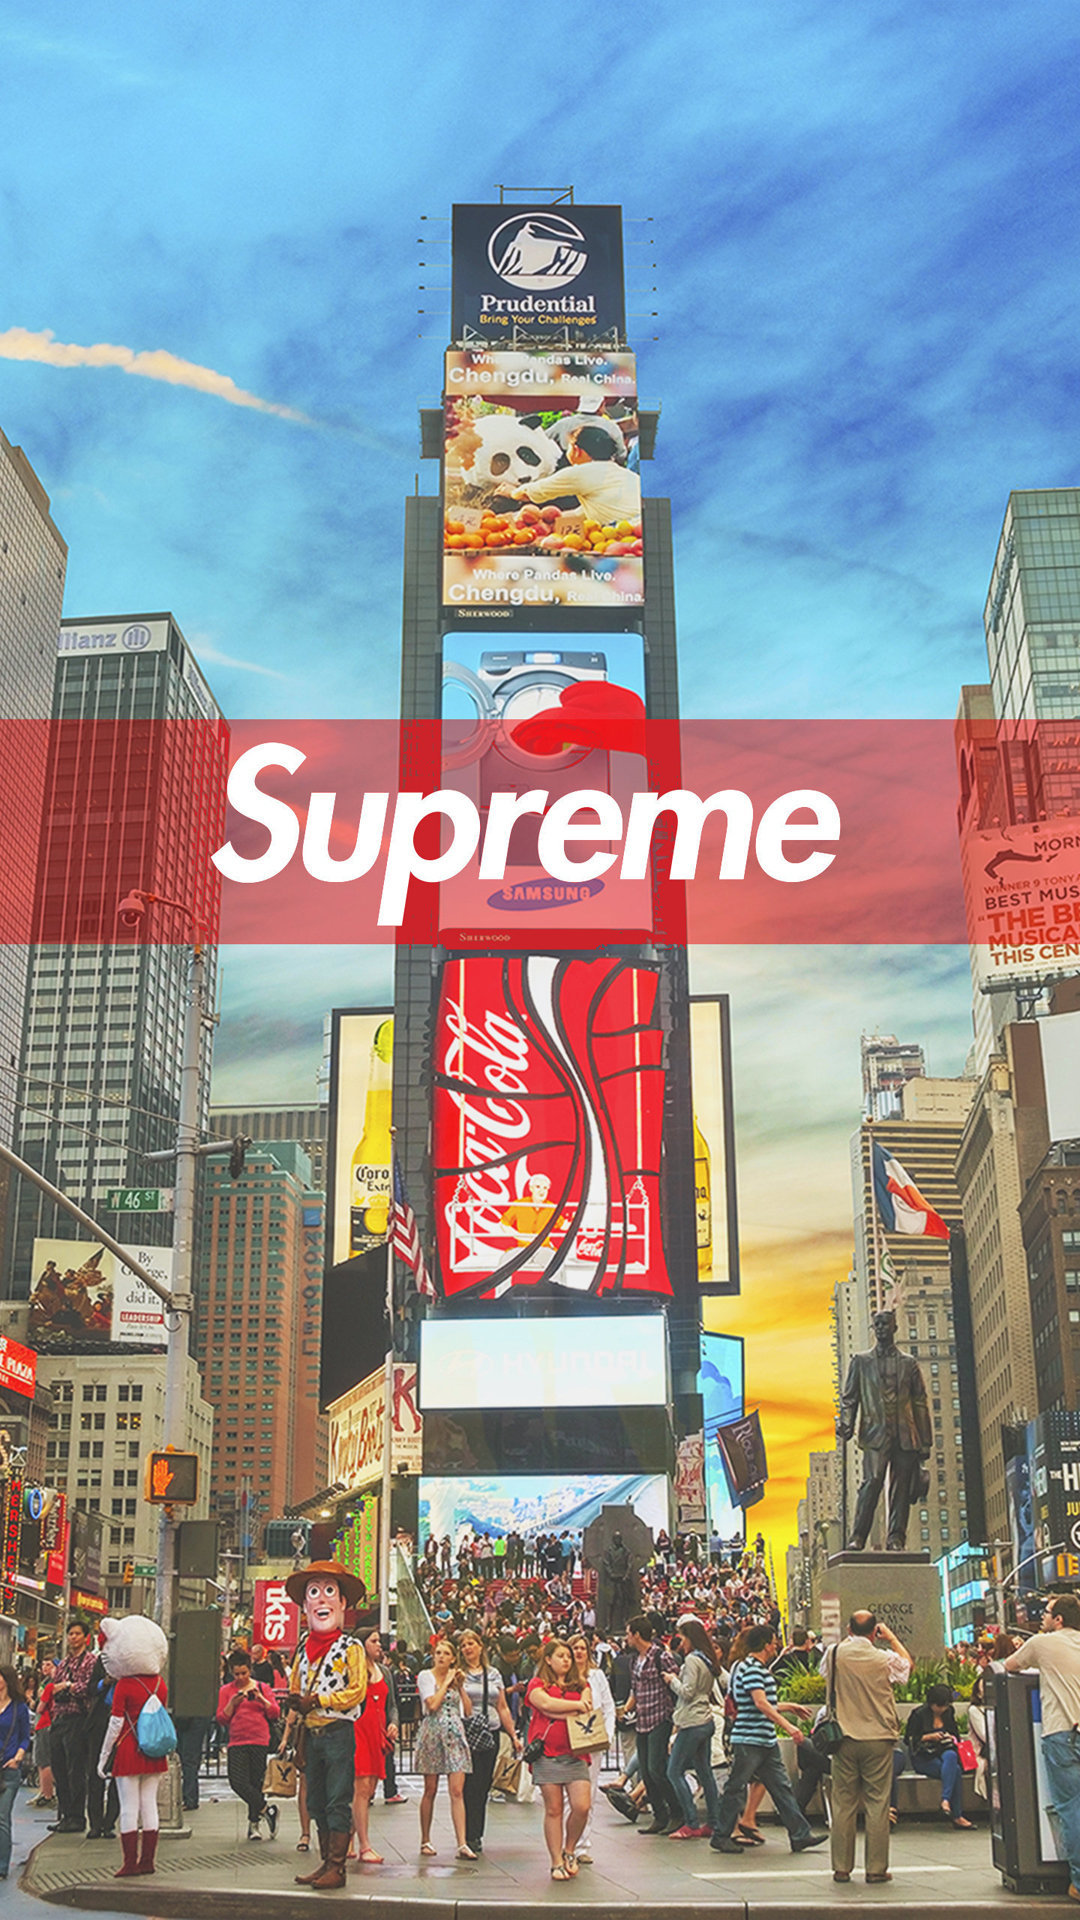 Free Download Supreme New York Iphone Wallpaper Hd 1080x19 For Your Desktop Mobile Tablet Explore 44 Supreme New York Iphone Wallpaper Supreme New York Iphone Wallpaper New York Iphone